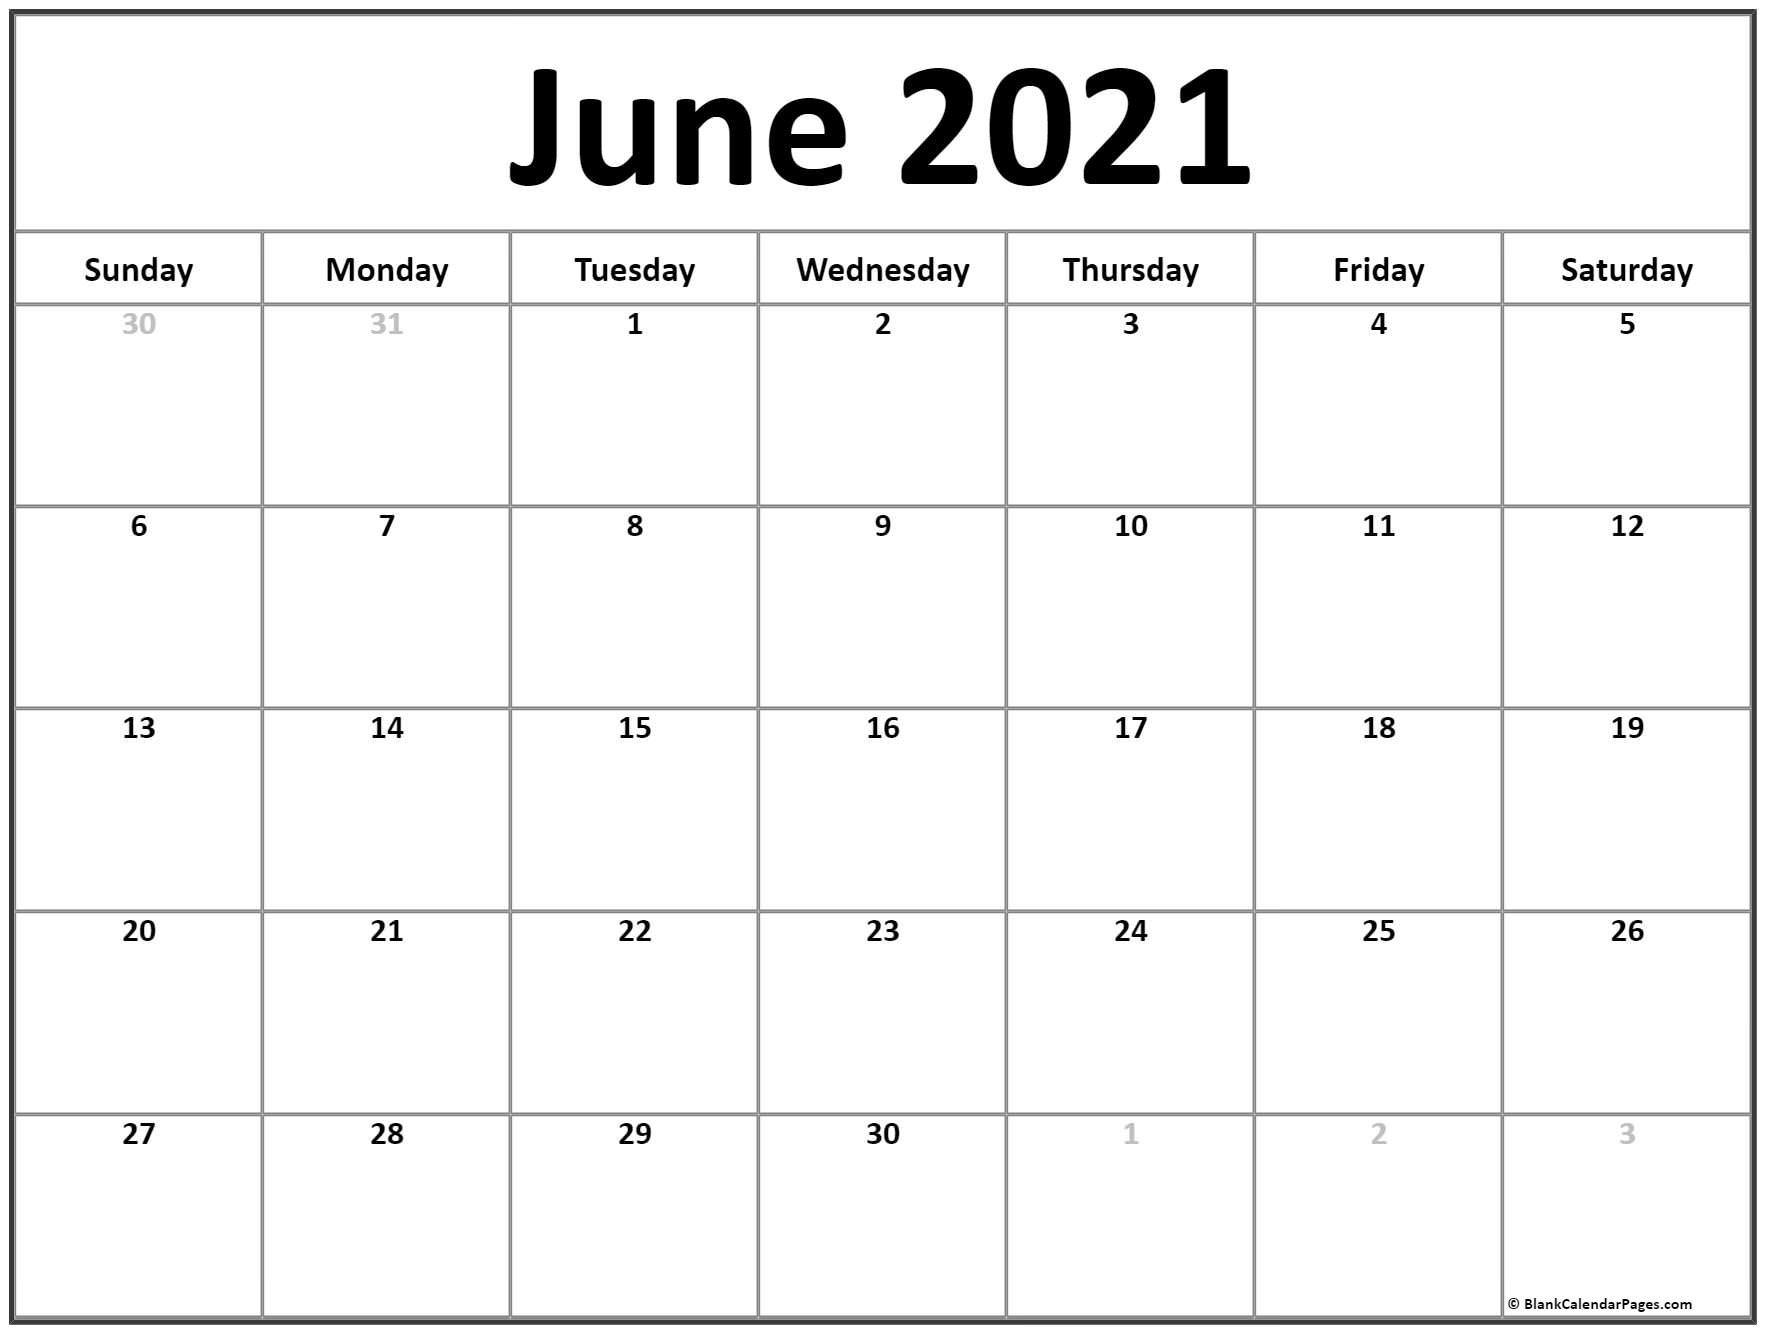 August 2021 I Can Type Into Example Calendar Printable